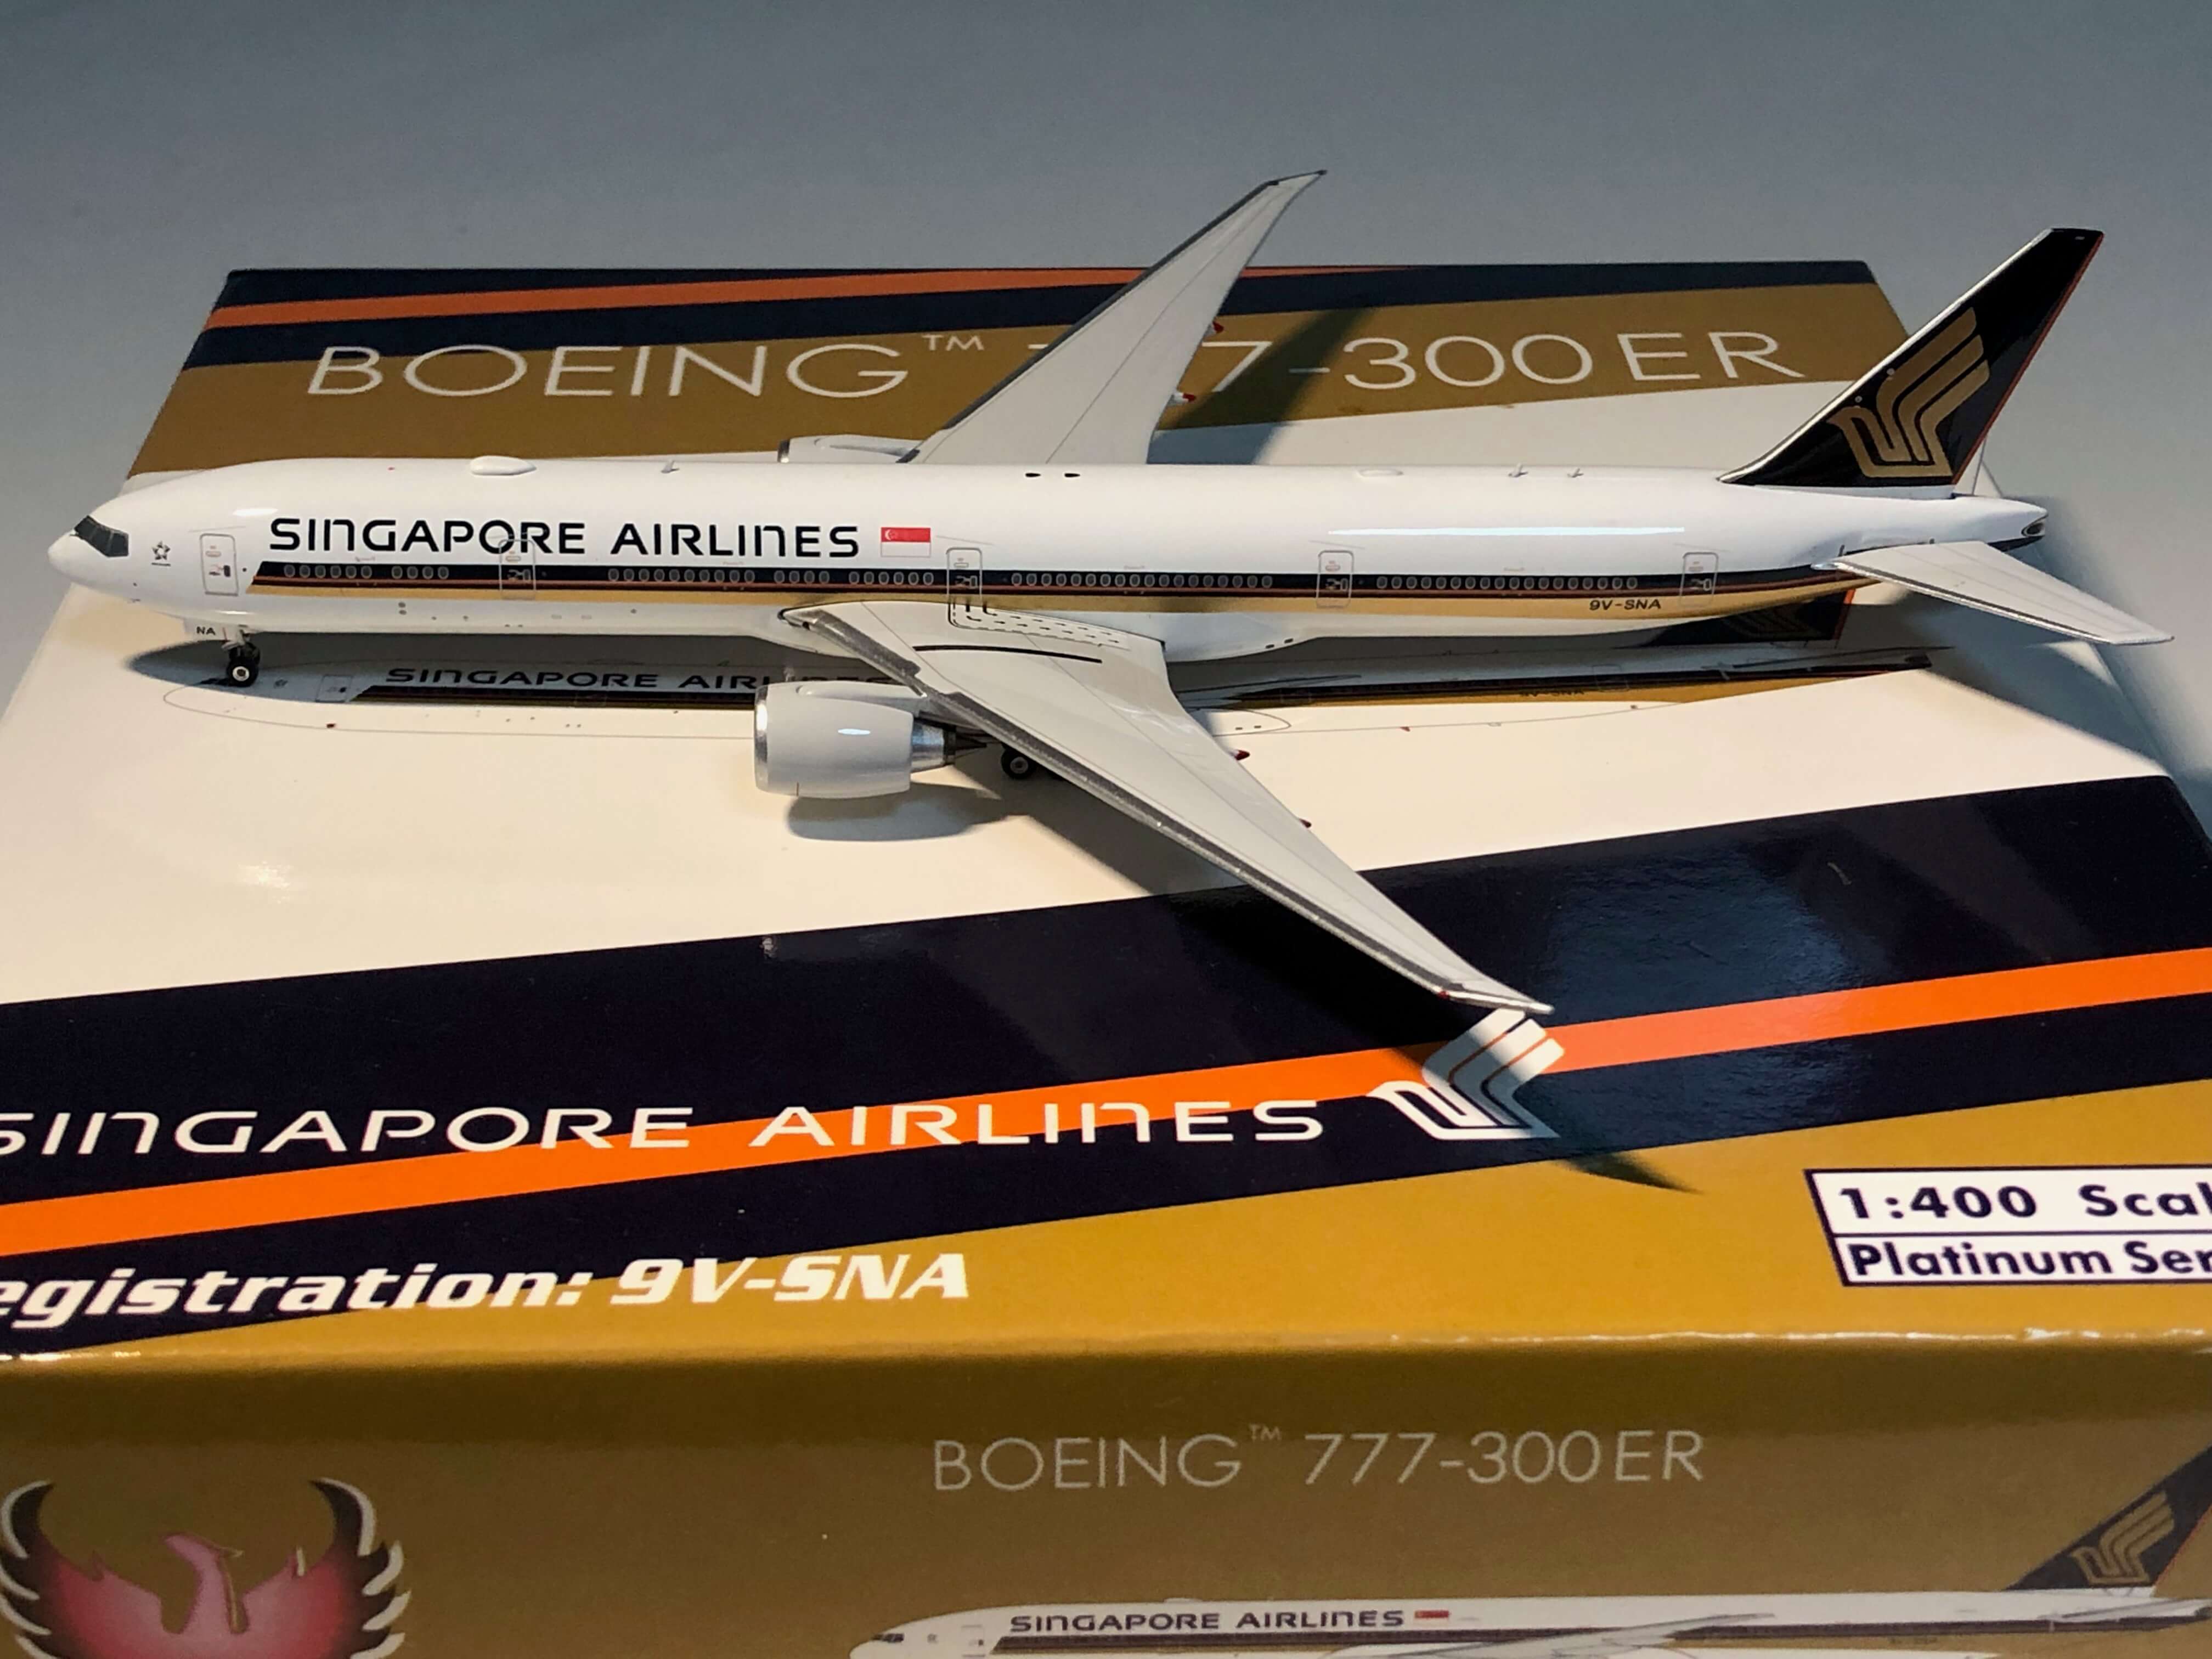 Singapore Airlines B777-300ER